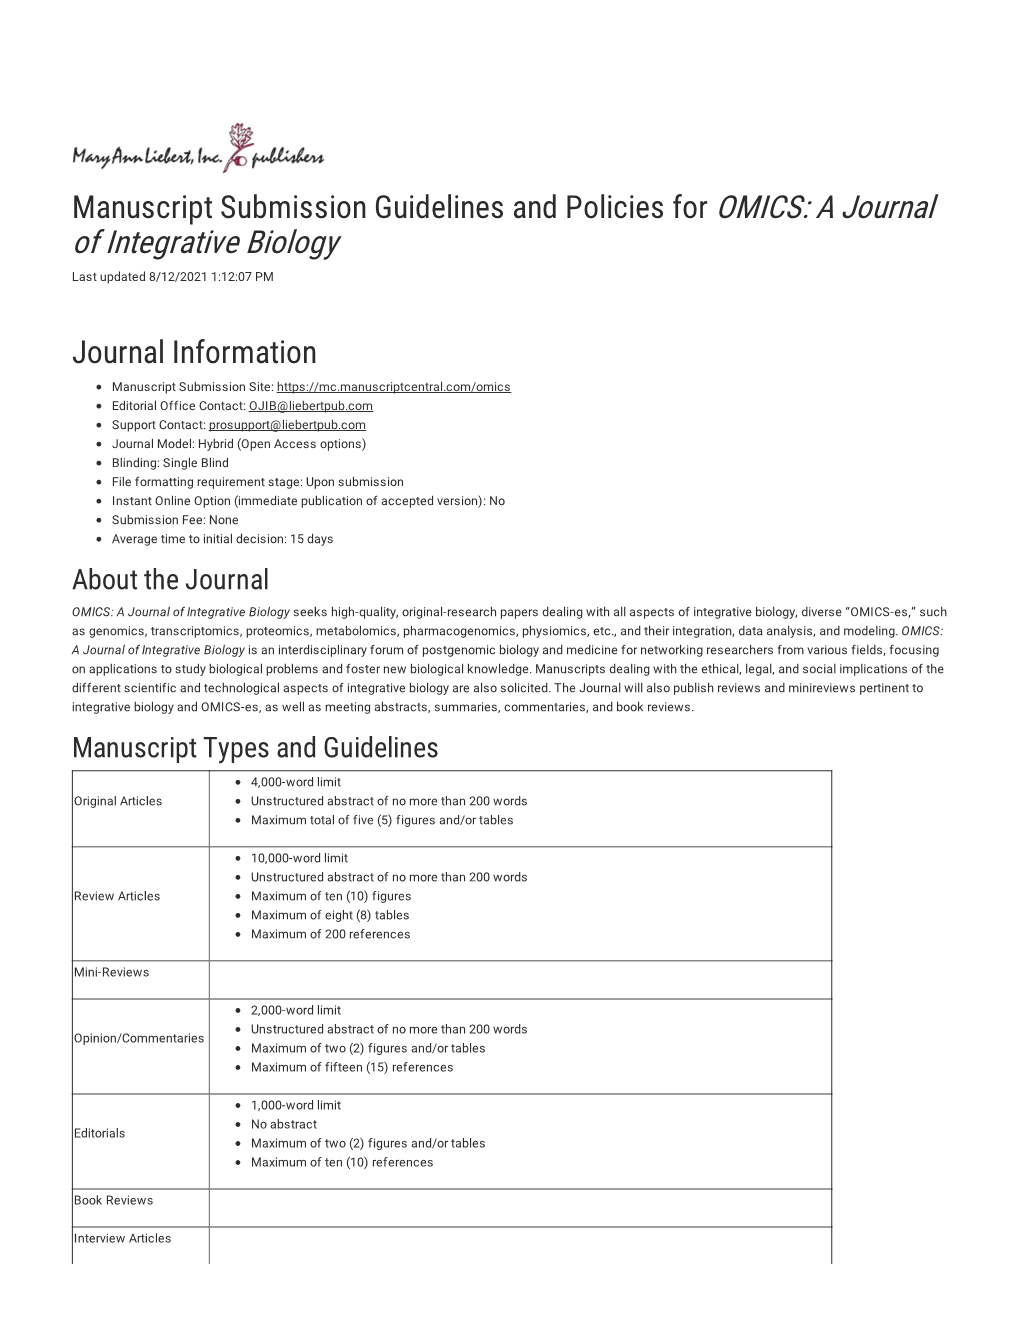 Mary Ann Liebert, Inc. Submission Guidelines and Policies